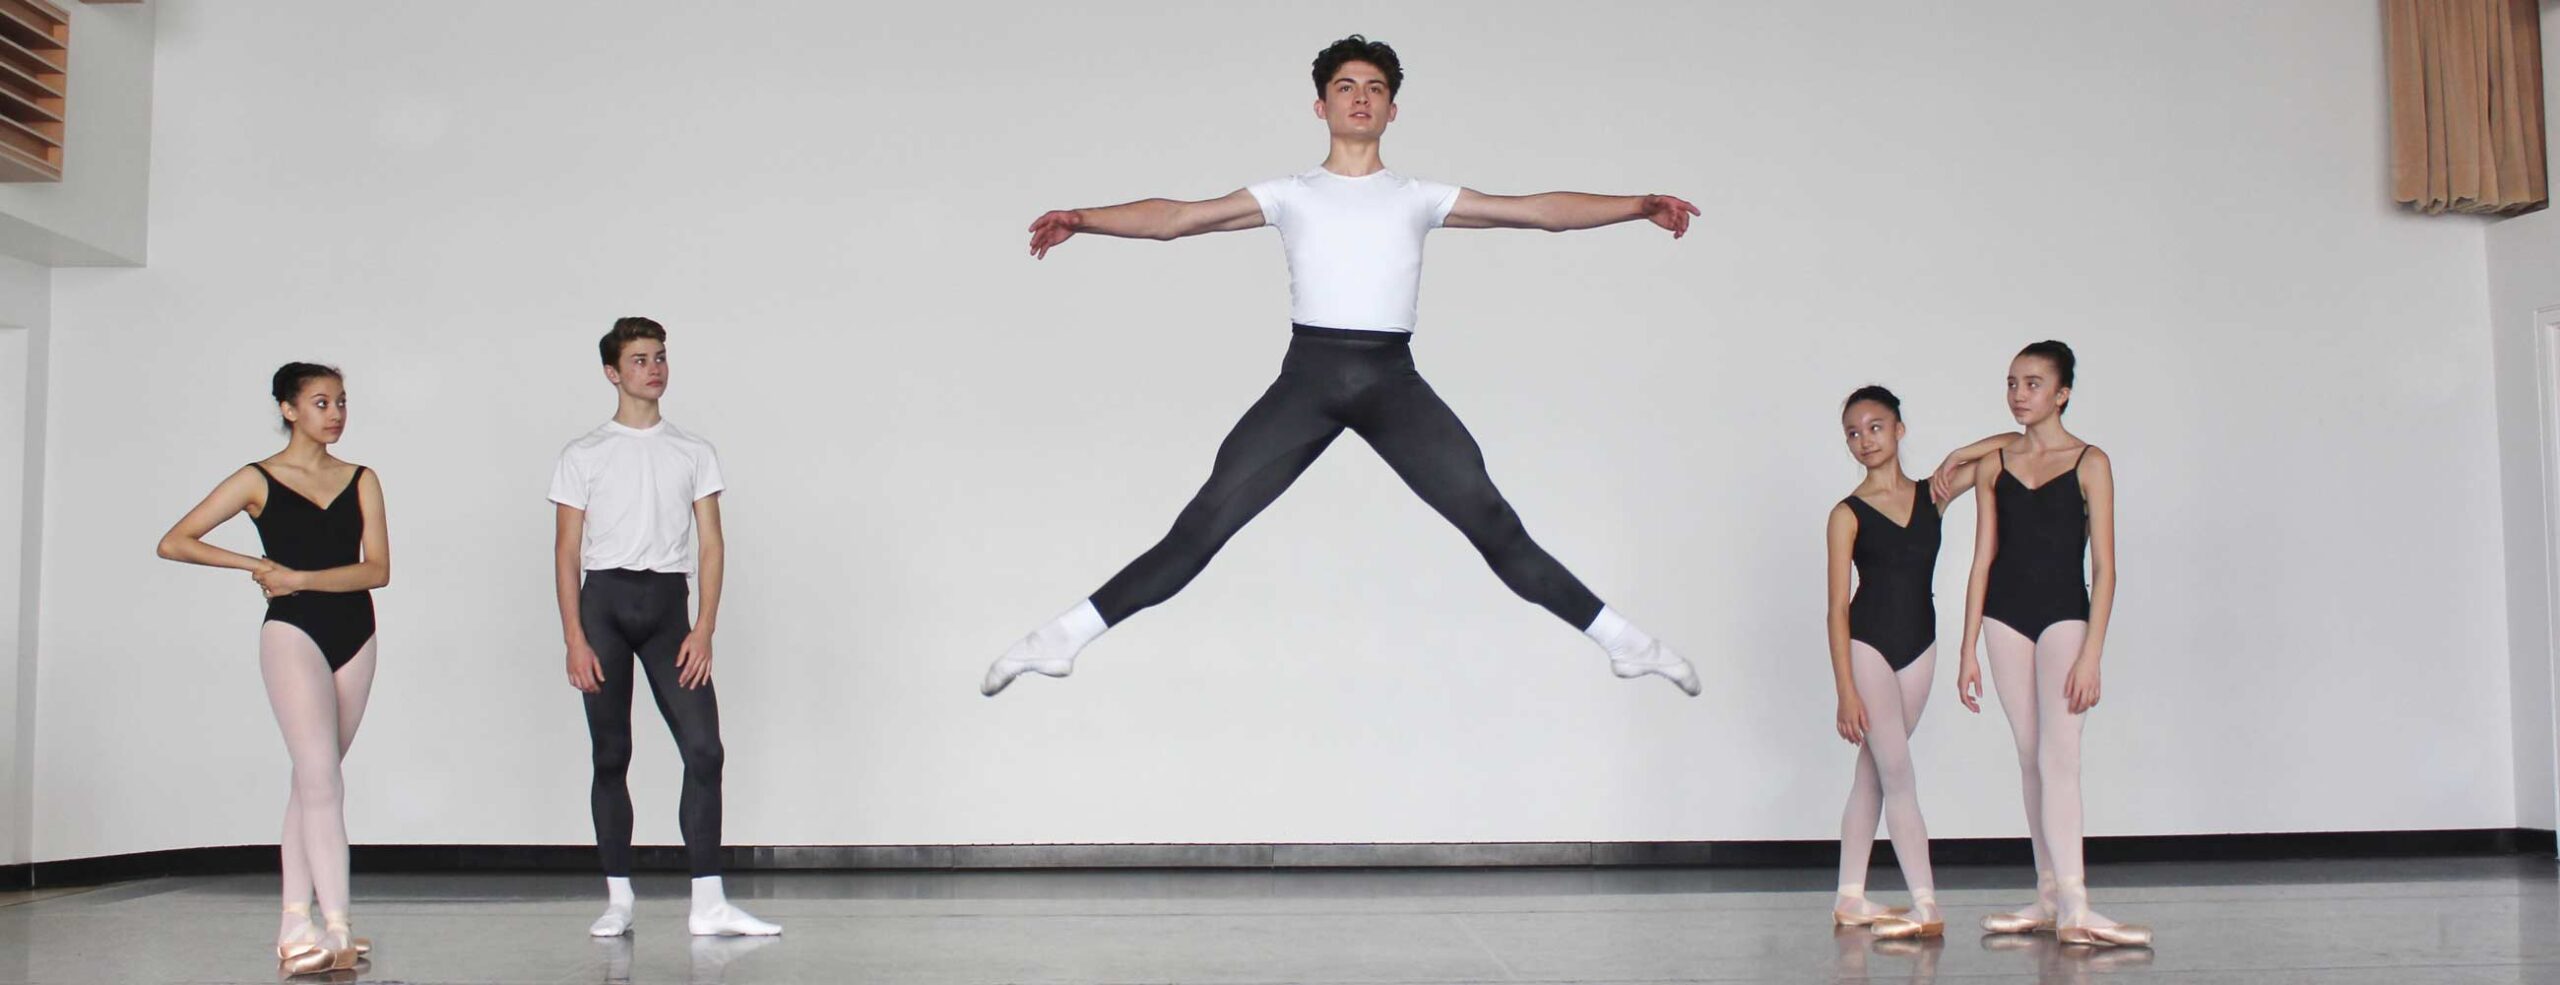 Male dancer jumping and posing with two dancers standing on either side